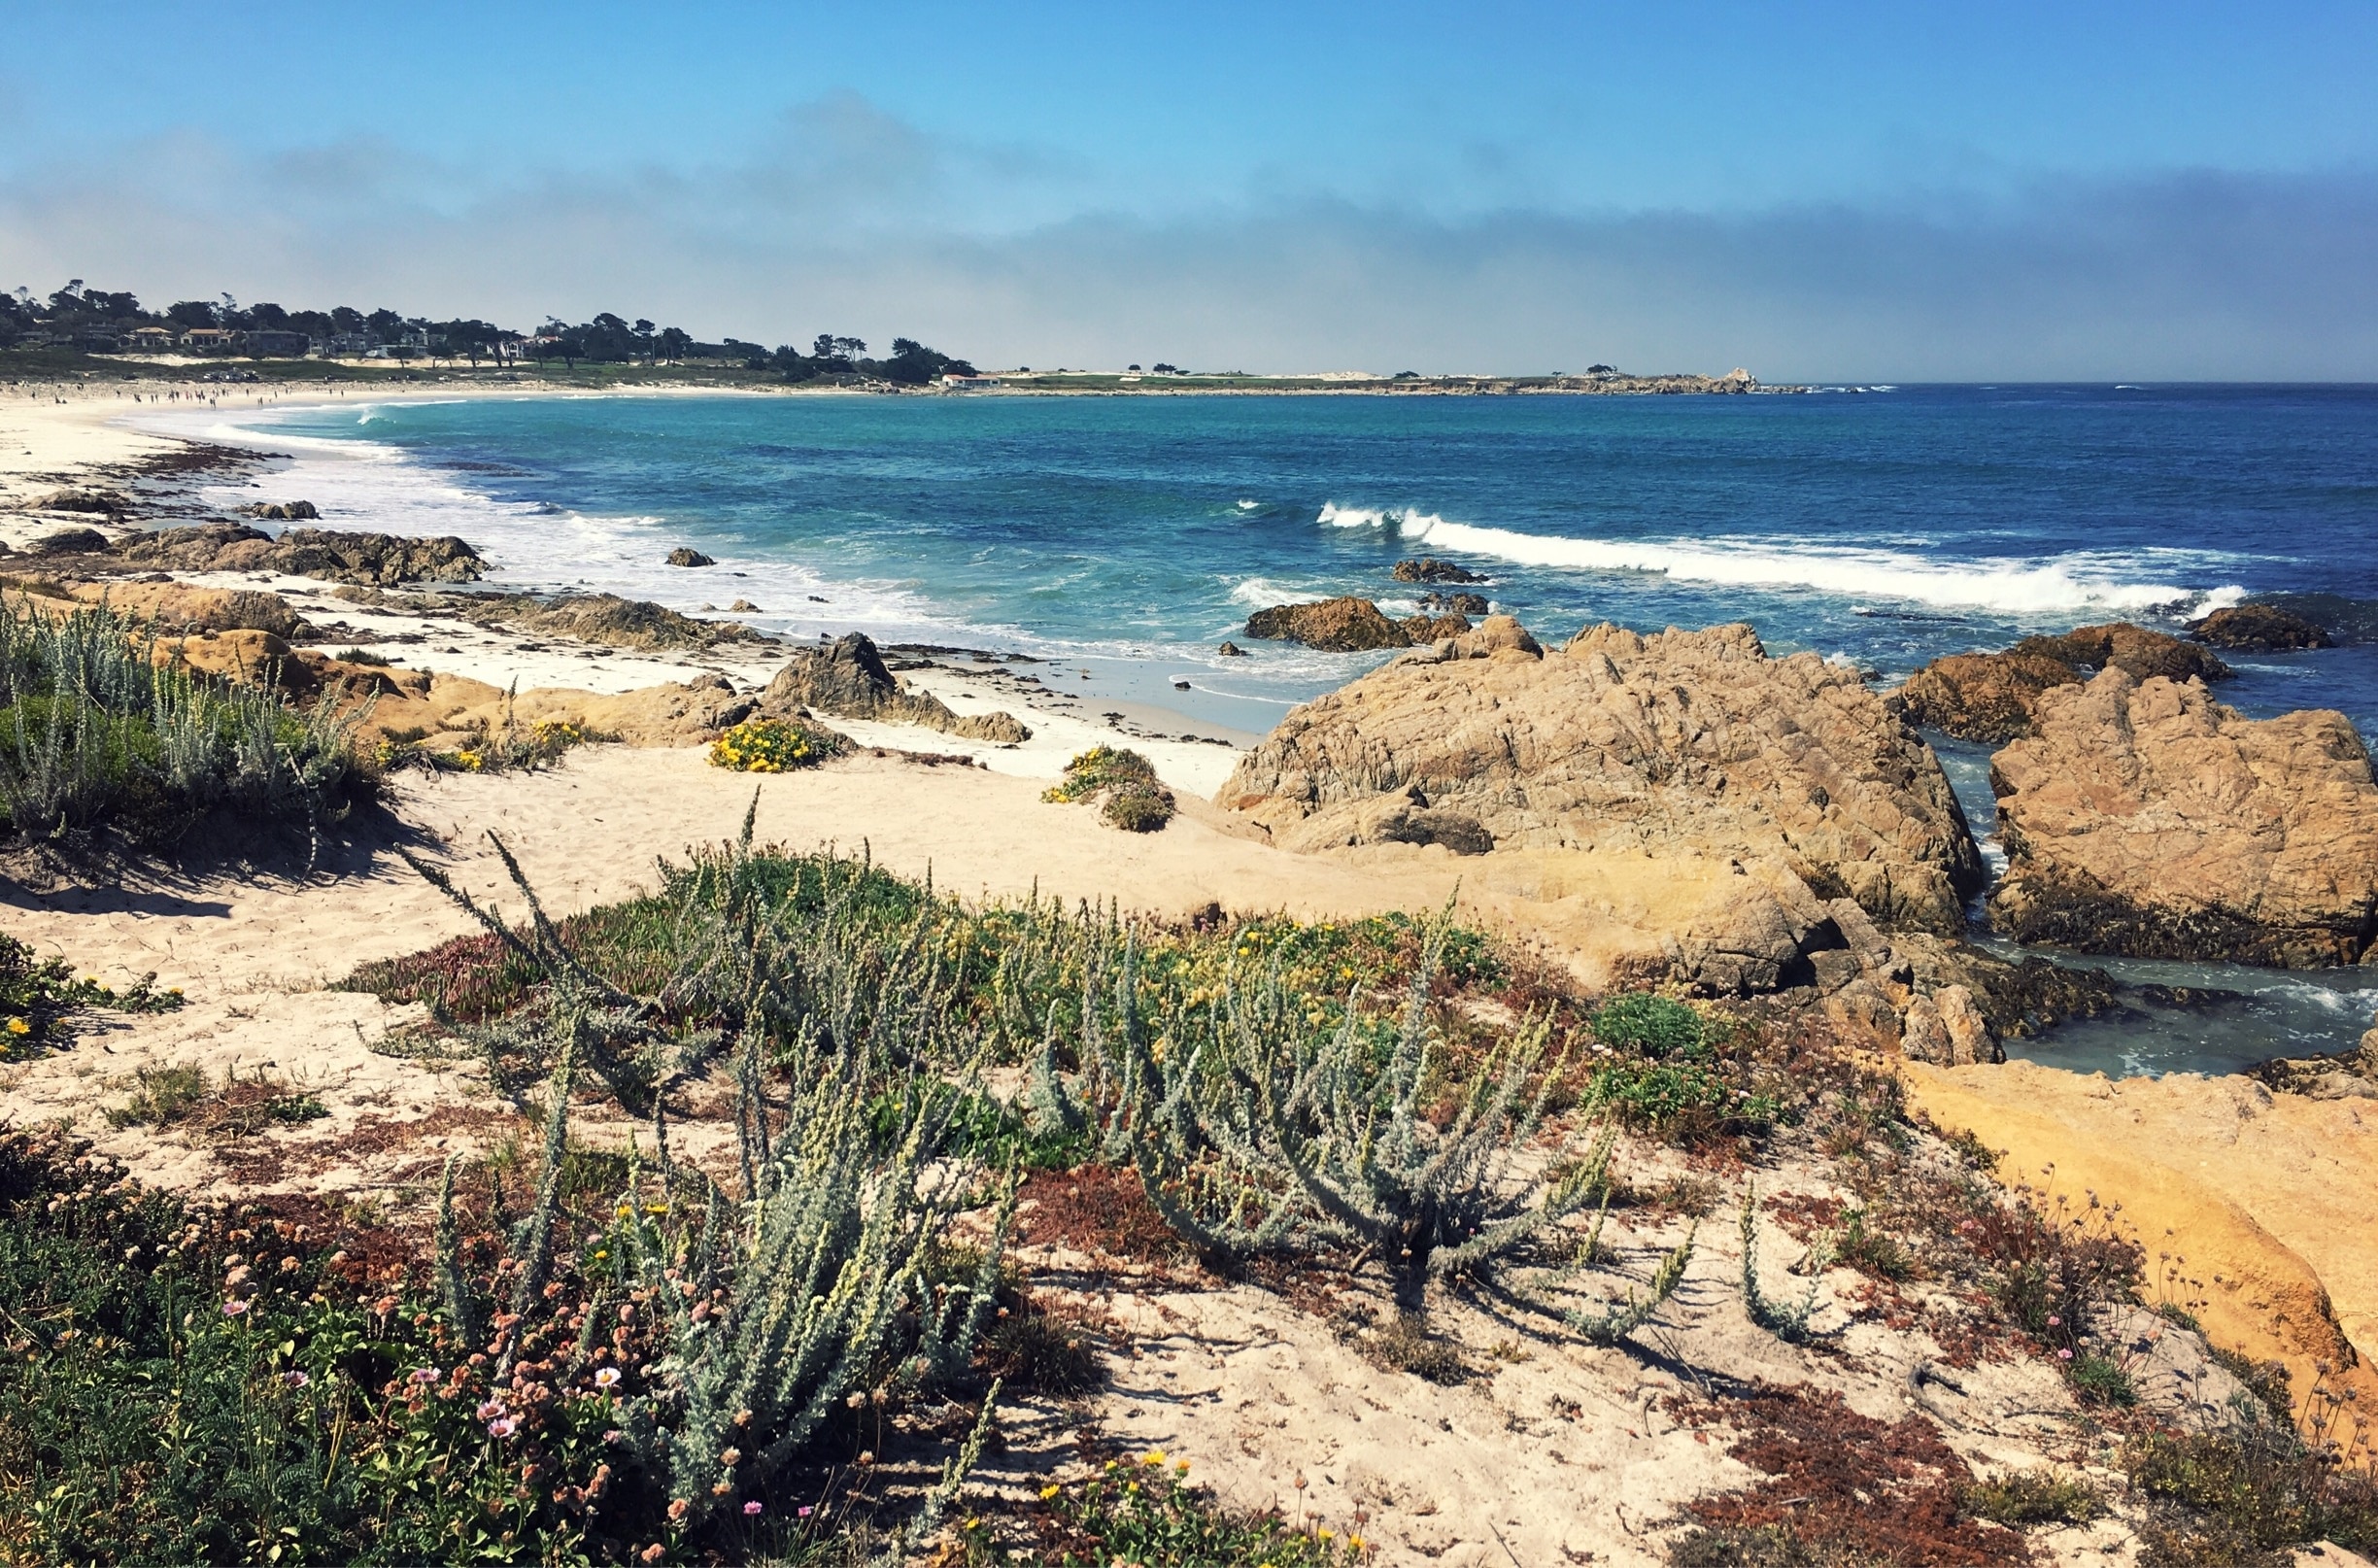 Spanish Bay can be accessed by vehicle from 17 Mile Drive ($10.50 per vehicle) or on foot from Asilomar State Beach (free) by walking south along the boardwalk.